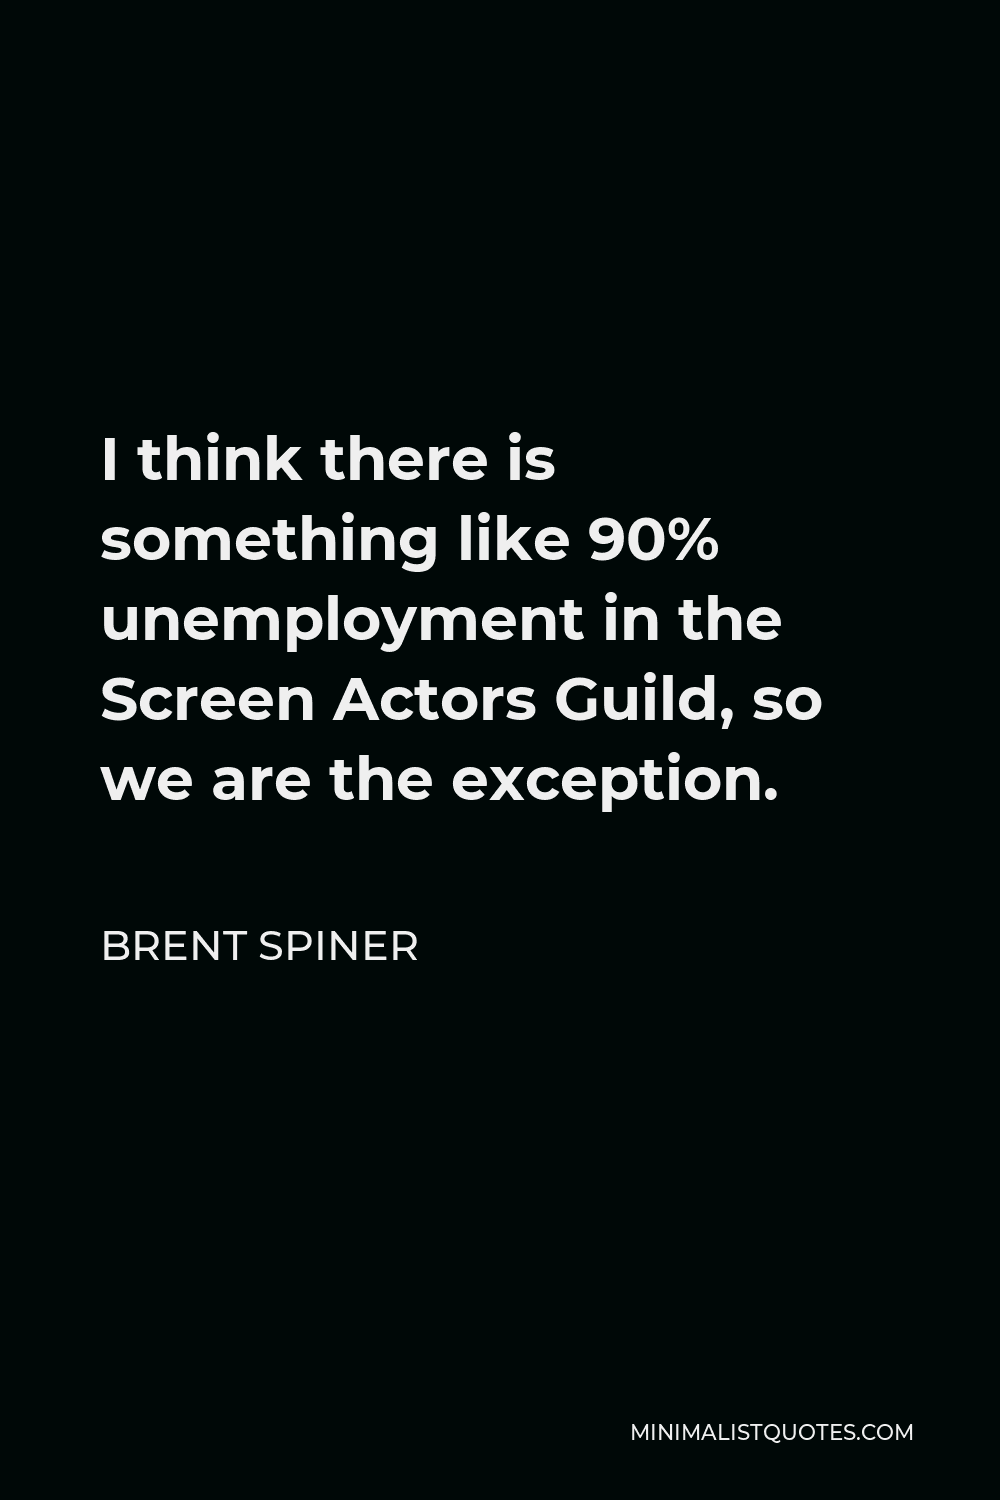 Brent Spiner Quote - I think there is something like 90% unemployment in the Screen Actors Guild, so we are the exception.